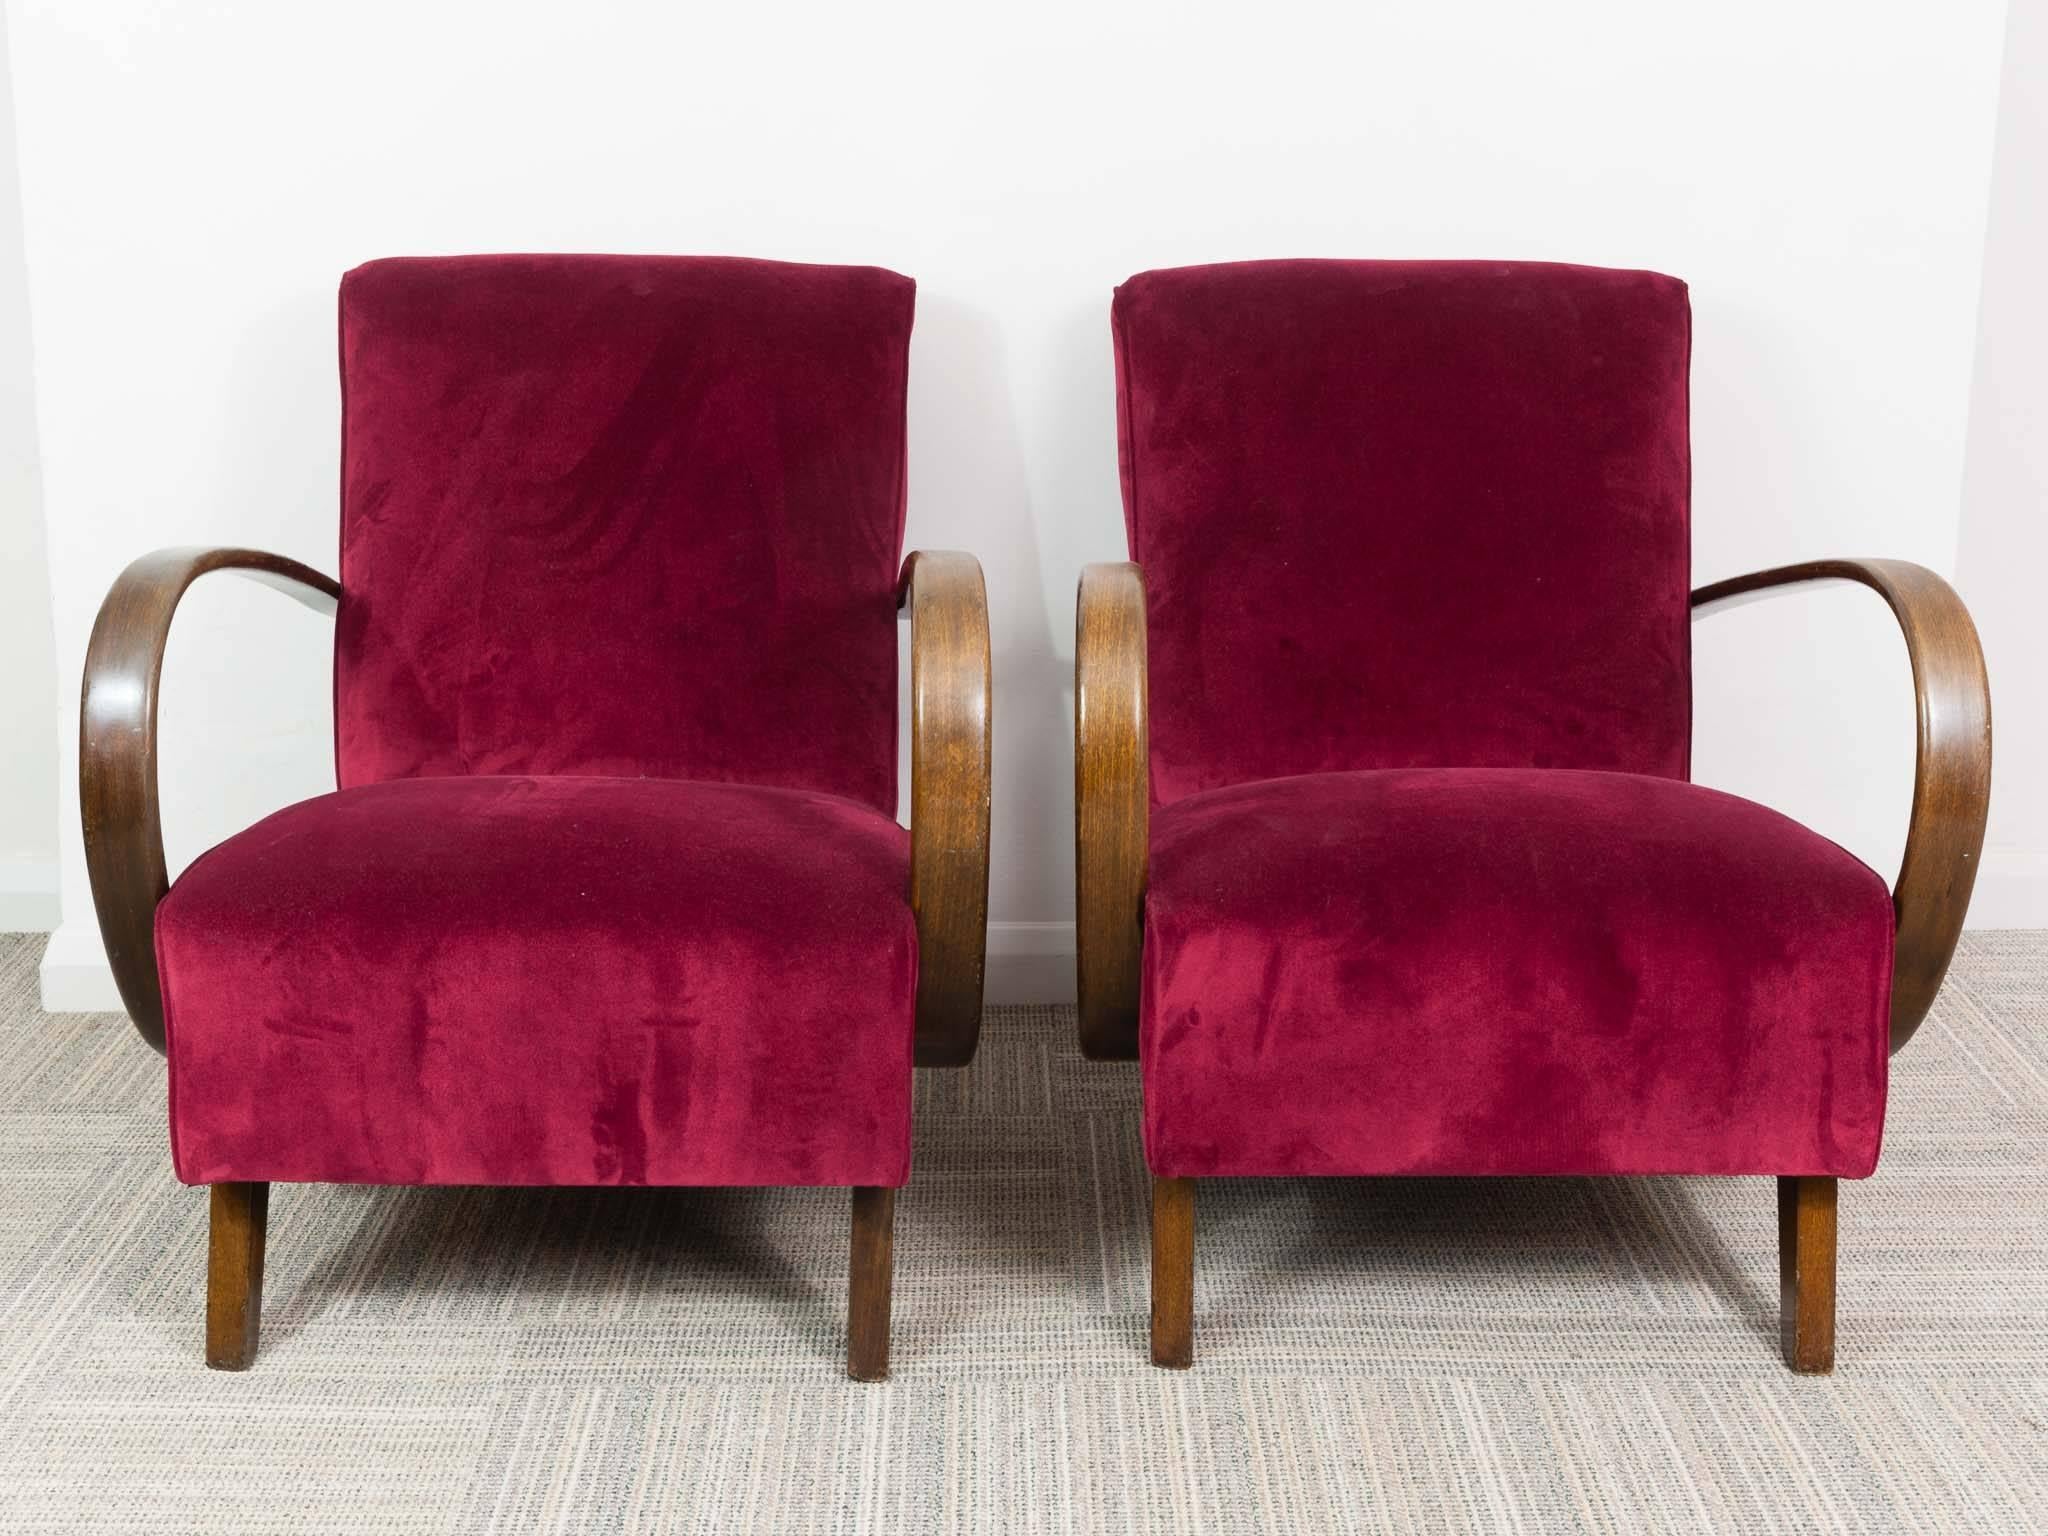 A pair newly upholstered Art Deco armchairs designed by Jindrich Halabala in the Czech Republic during the 1930s. Jindrich Halabala, one of the most prominent Czech furniture designers, worked for UP Závody Brno. The feature bentwood armrest and